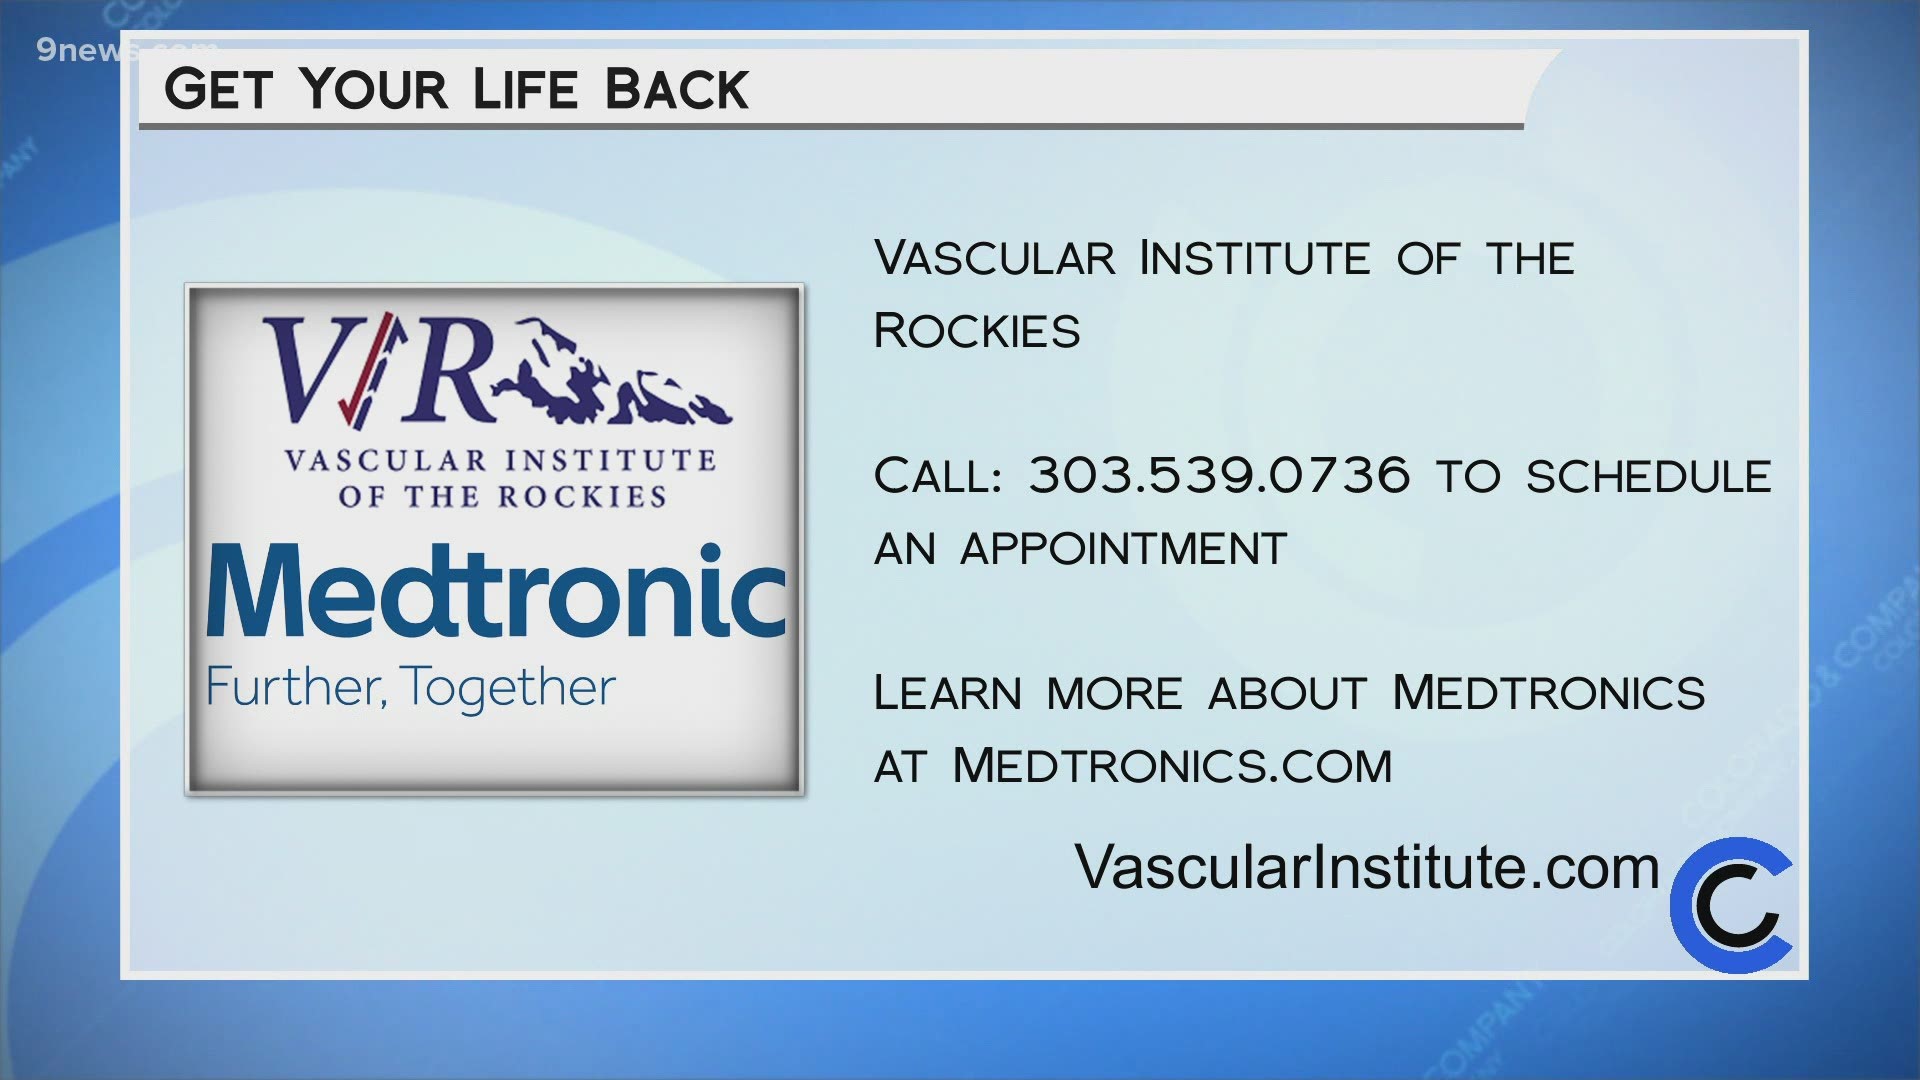 Call 303.539.0736 to schedule your appointment. You can also learn more at VascularInstitute.com or Medtronics.com.